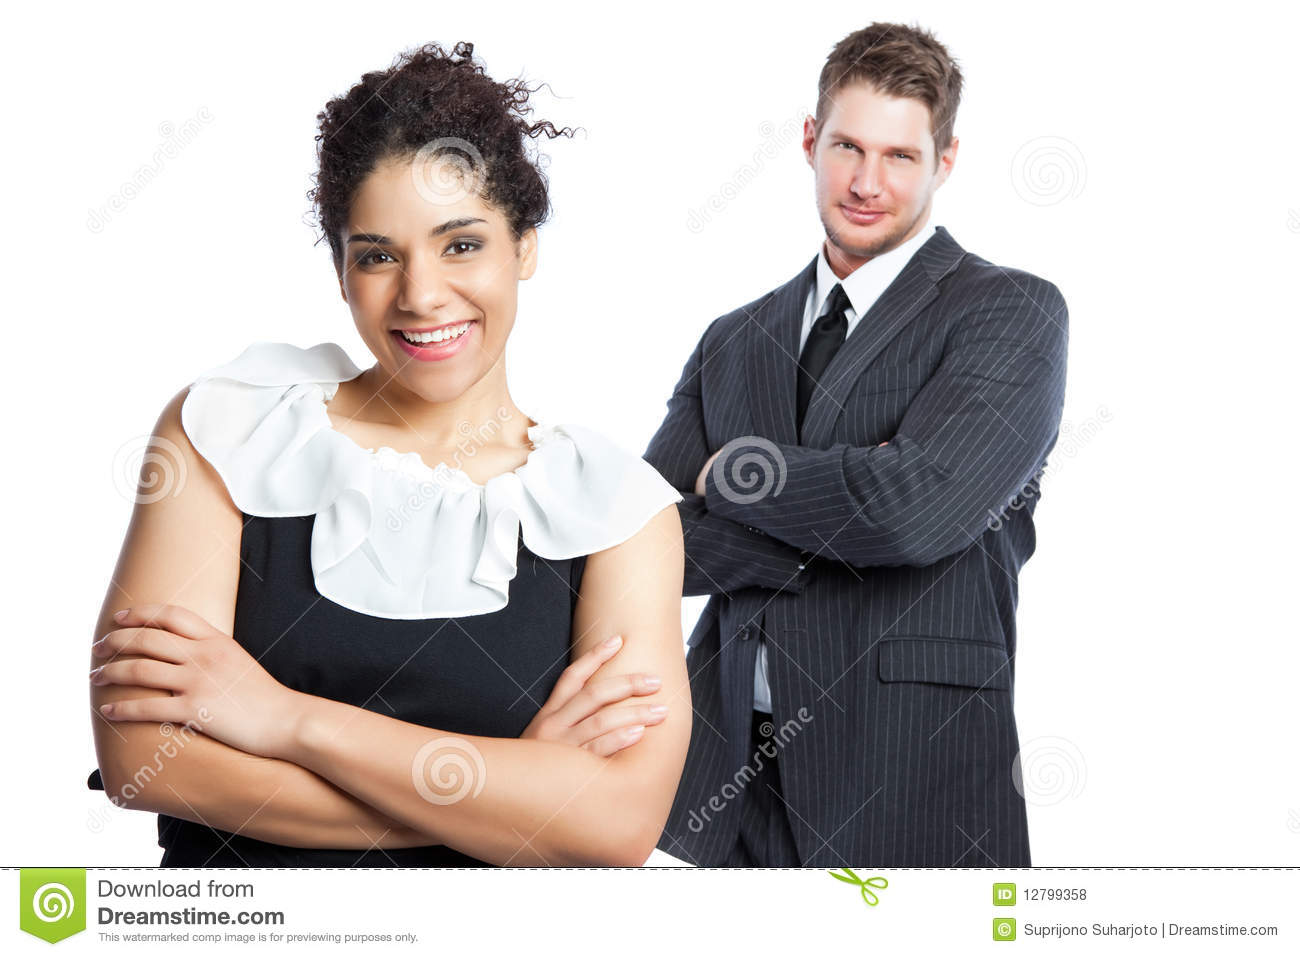 Free Stock Photos Business People